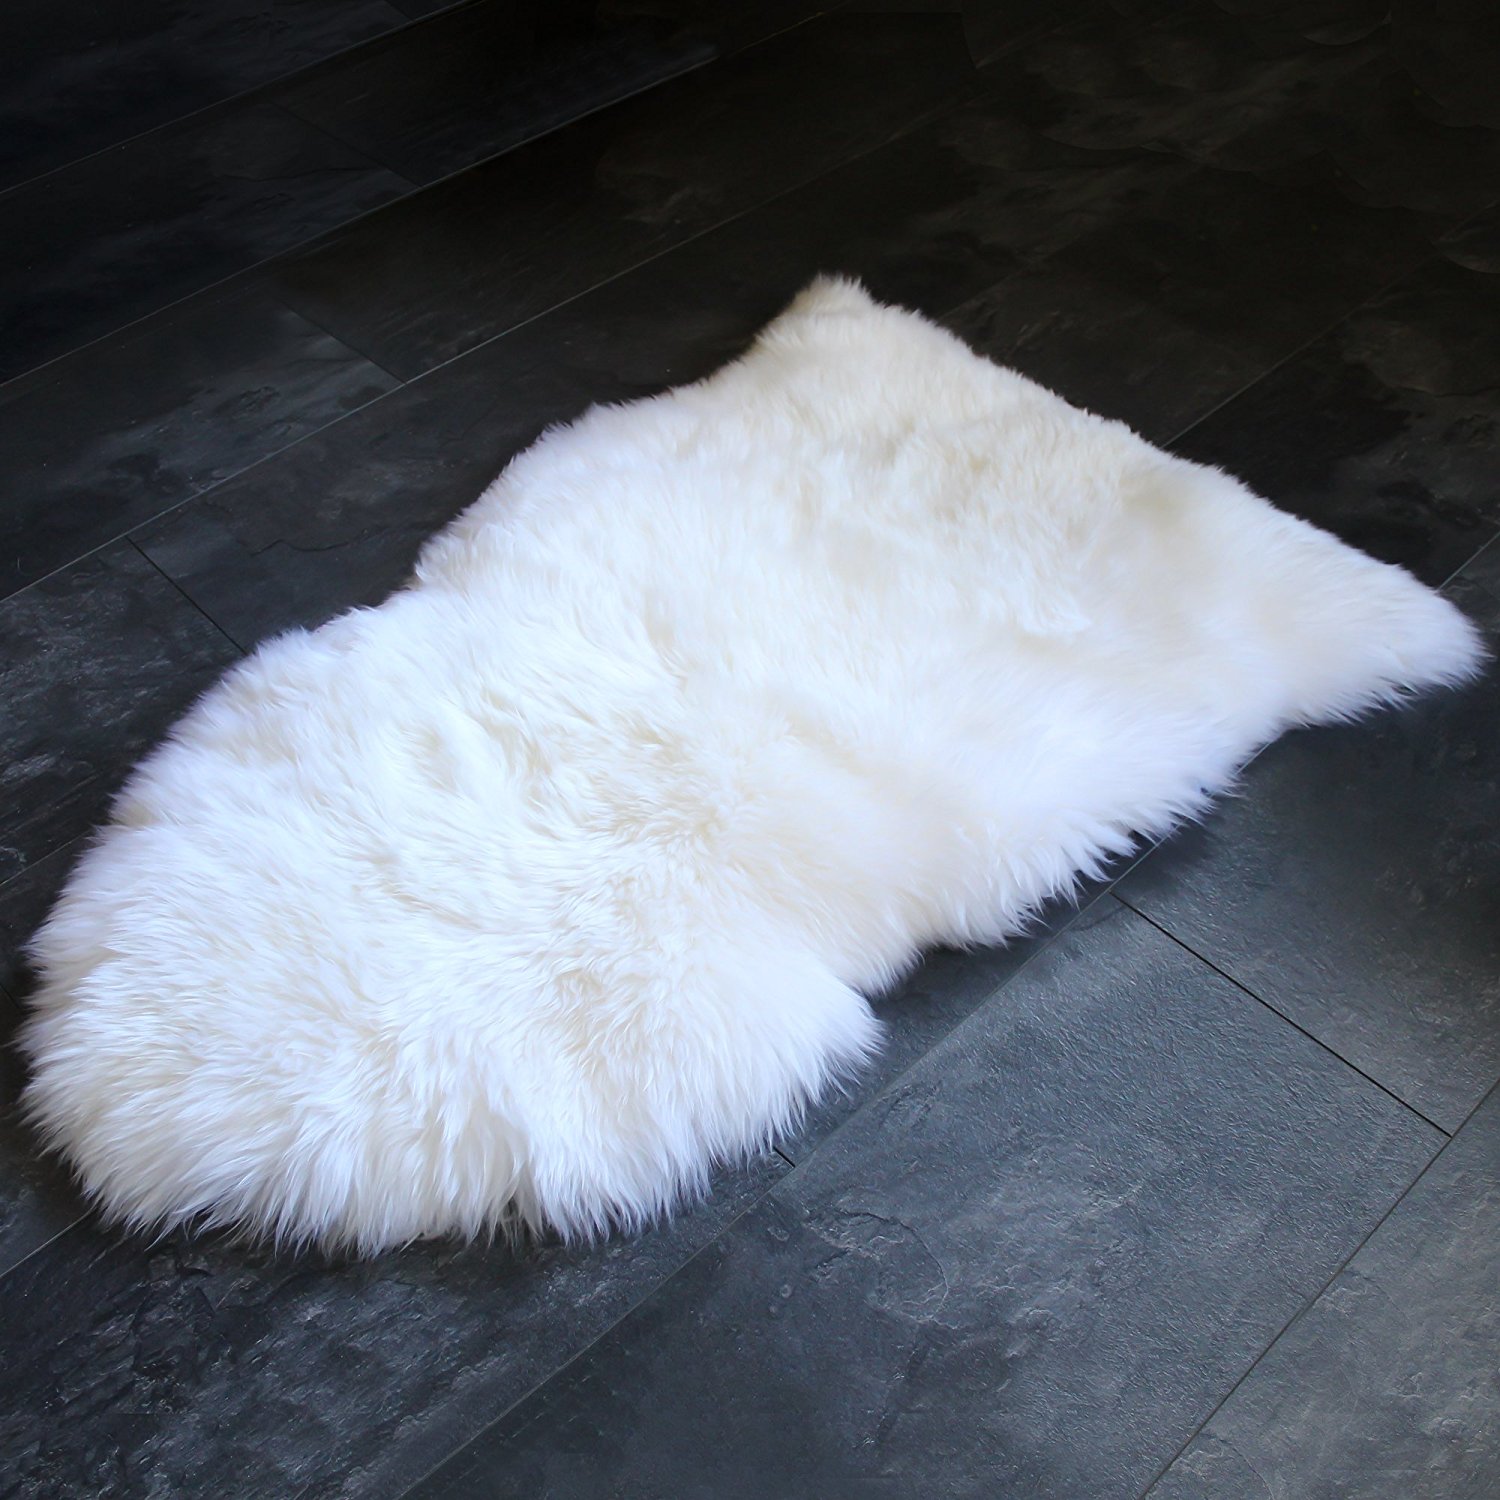 Sheepskin Rug Genuine Soft Natural Merino + Care & Cleaning Guide (2ft x 3ft White/Ivory)